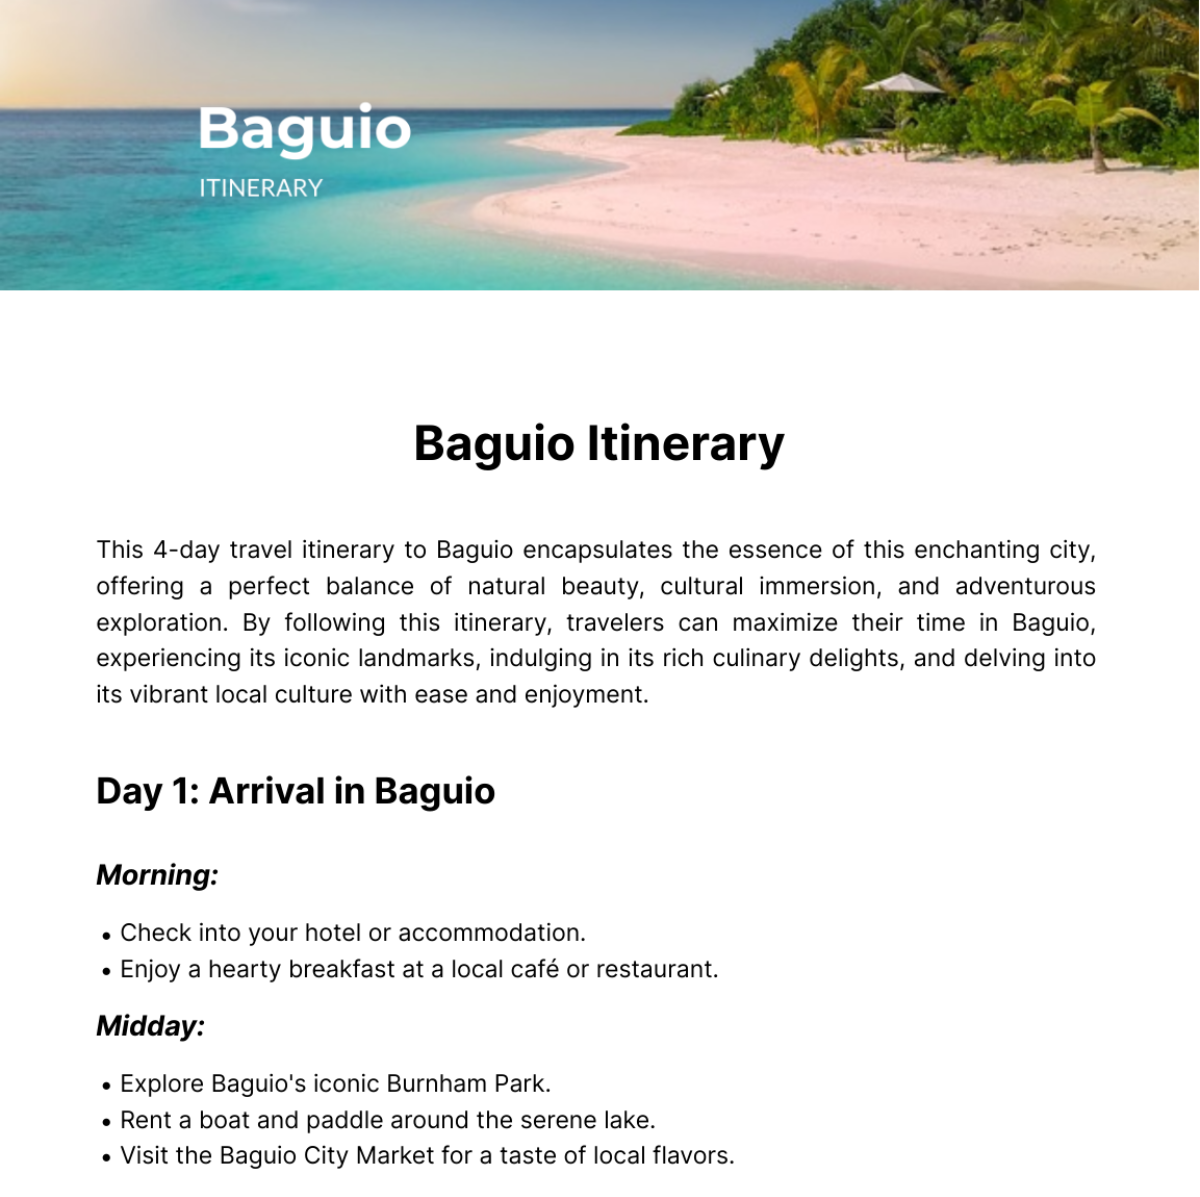 Baguio Itinerary Template